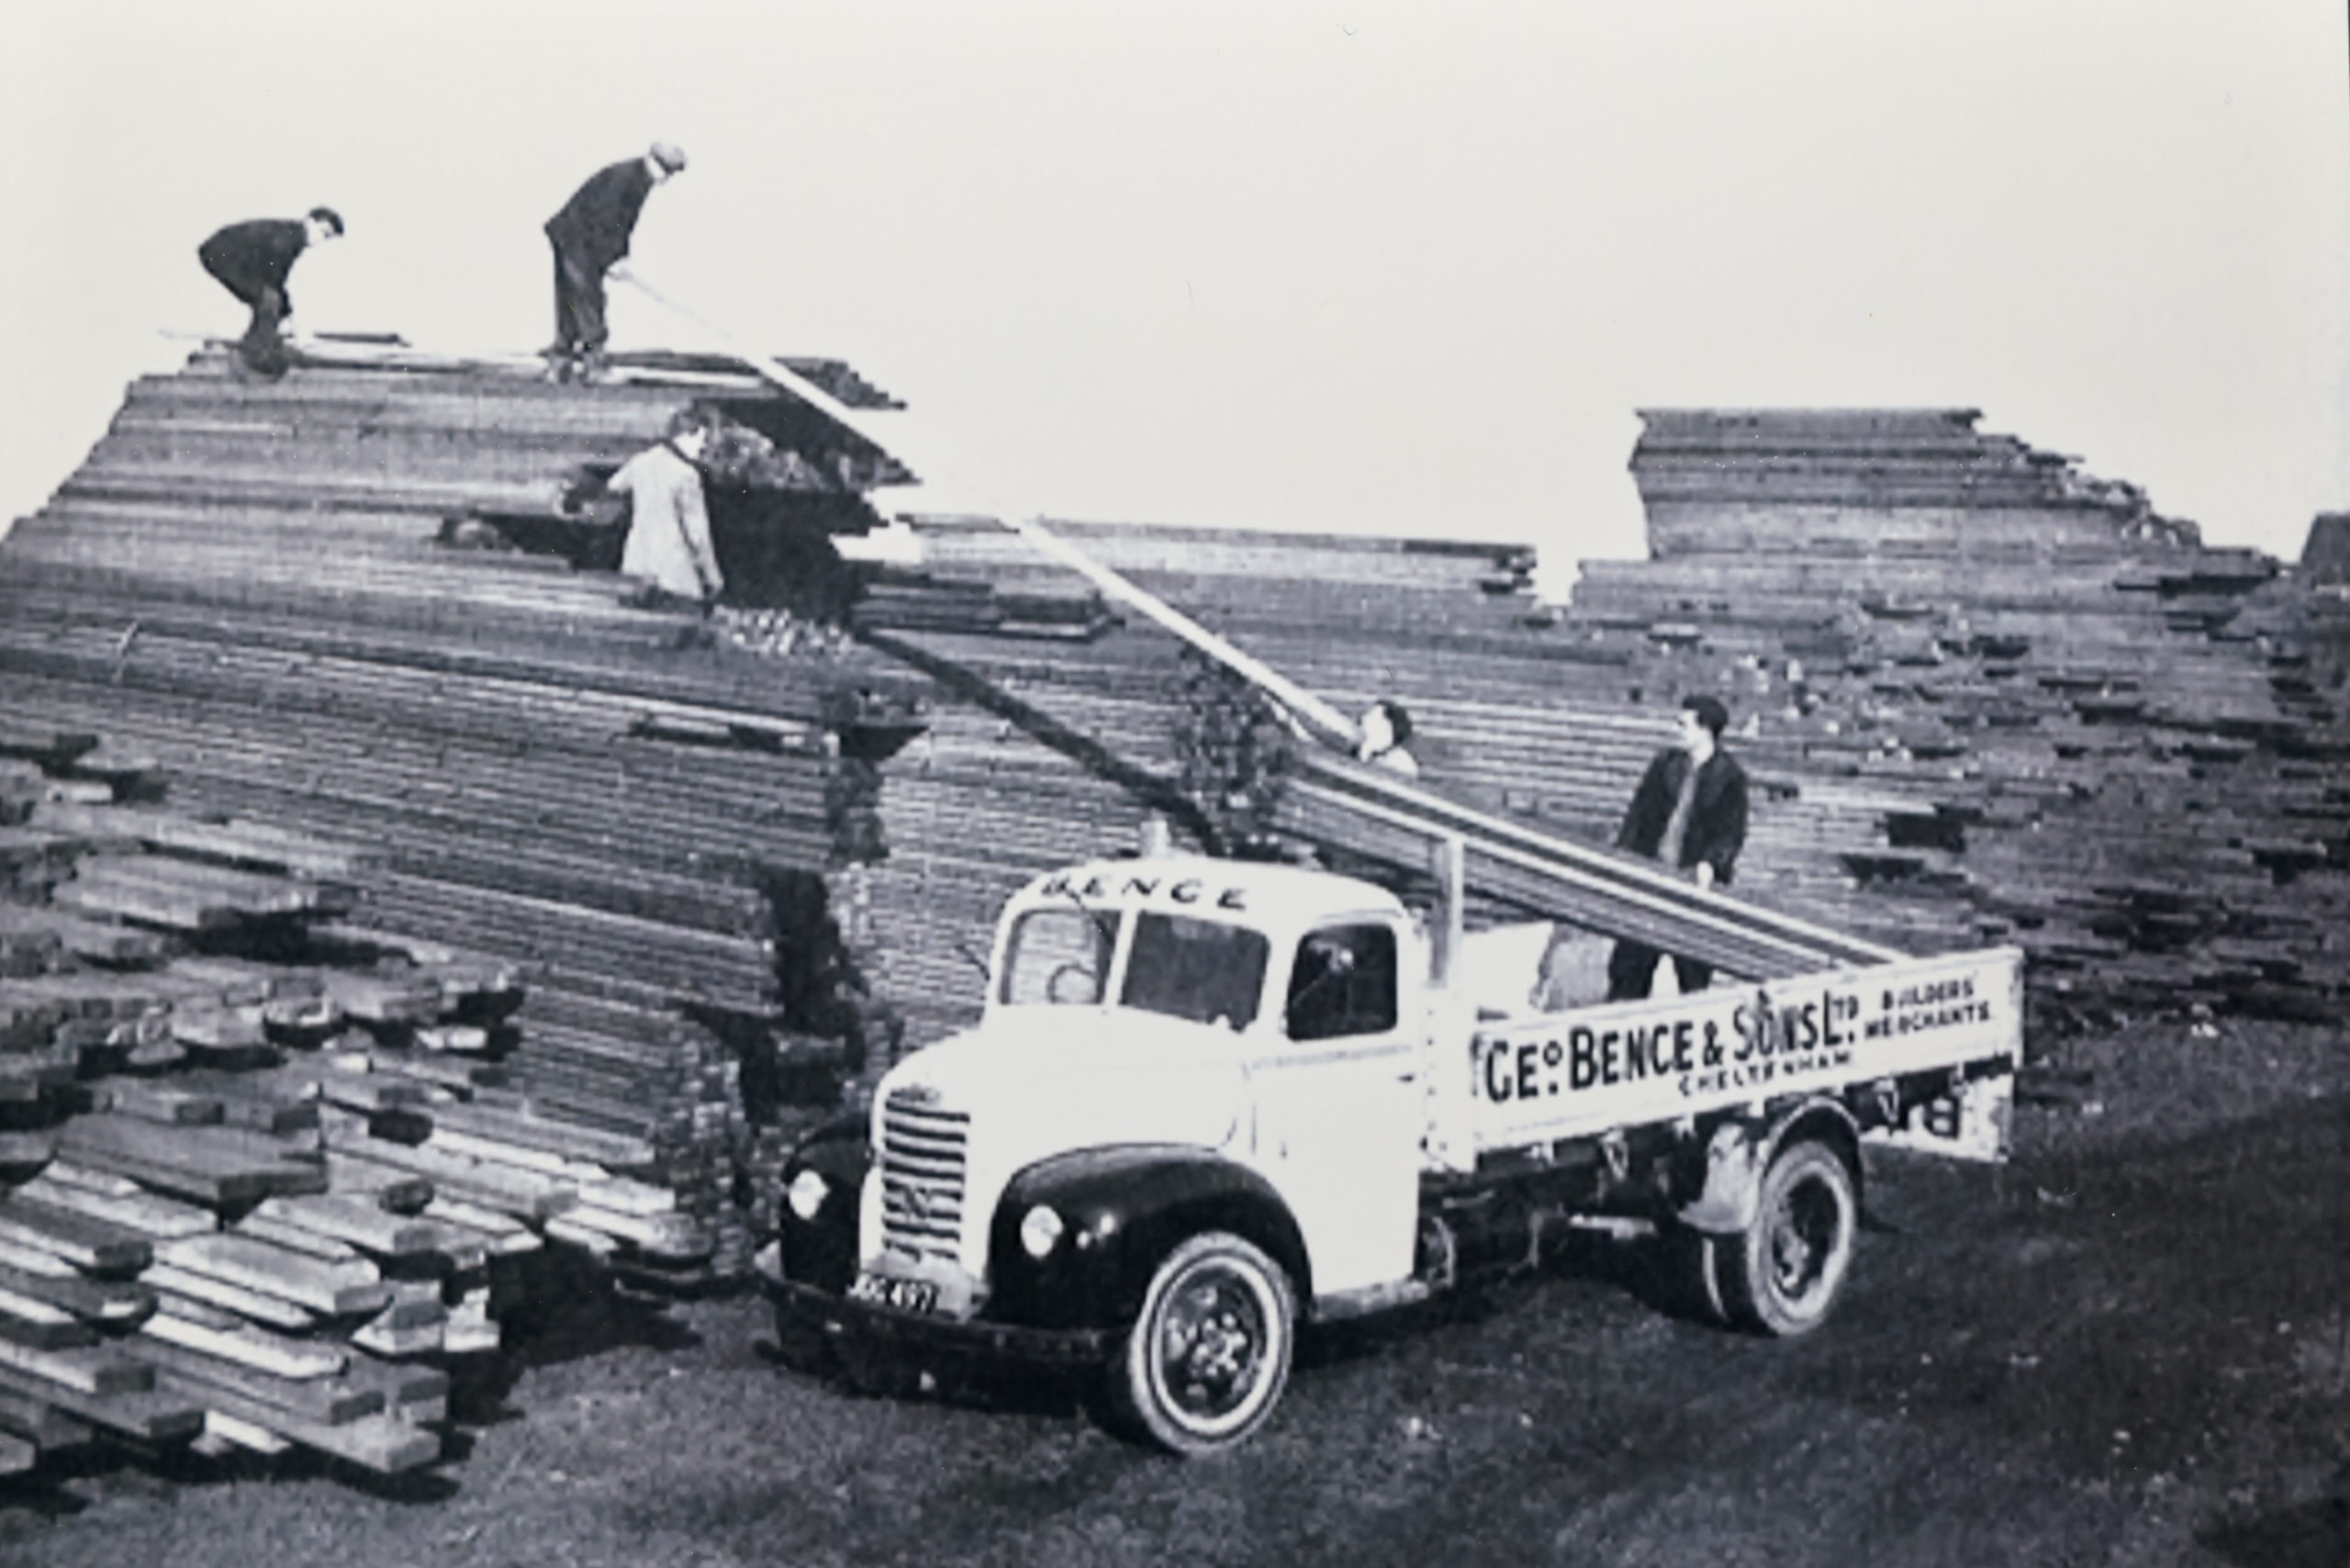 Builders' merchant George Bence & Sons has become one of the few firms in the world to make it to 170 years in business.